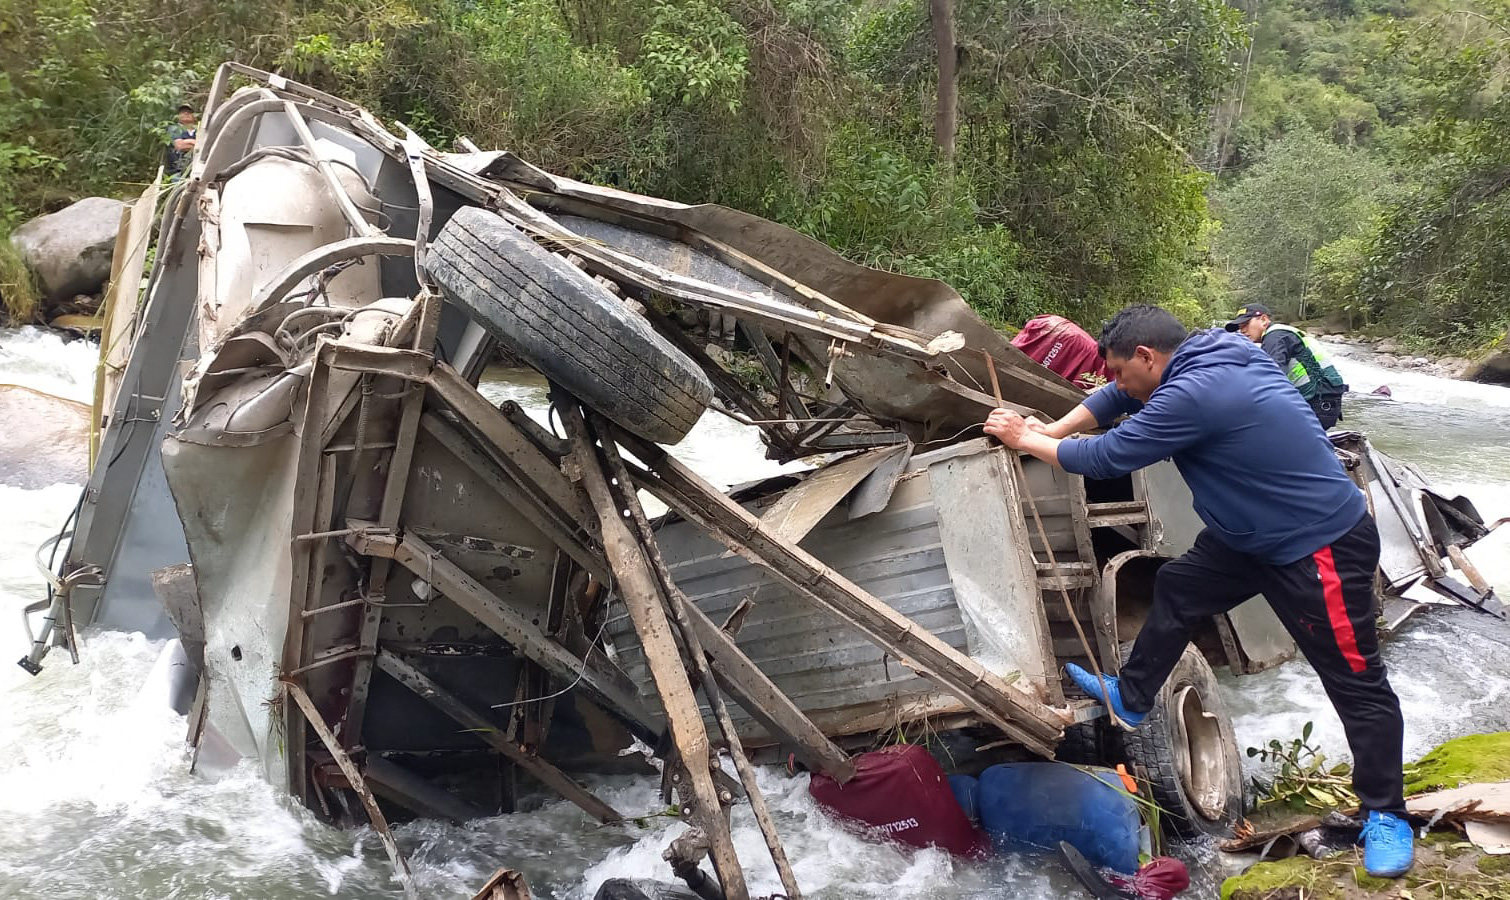 A policeman dressed as a civilian inspecting the remains of a bus that fell into a ravine from a mountain road in the Andean region of Cajamarca, Peru on Monday, leaving at least 25 dead. Photo: Policia Nacional del Peru / AFP  